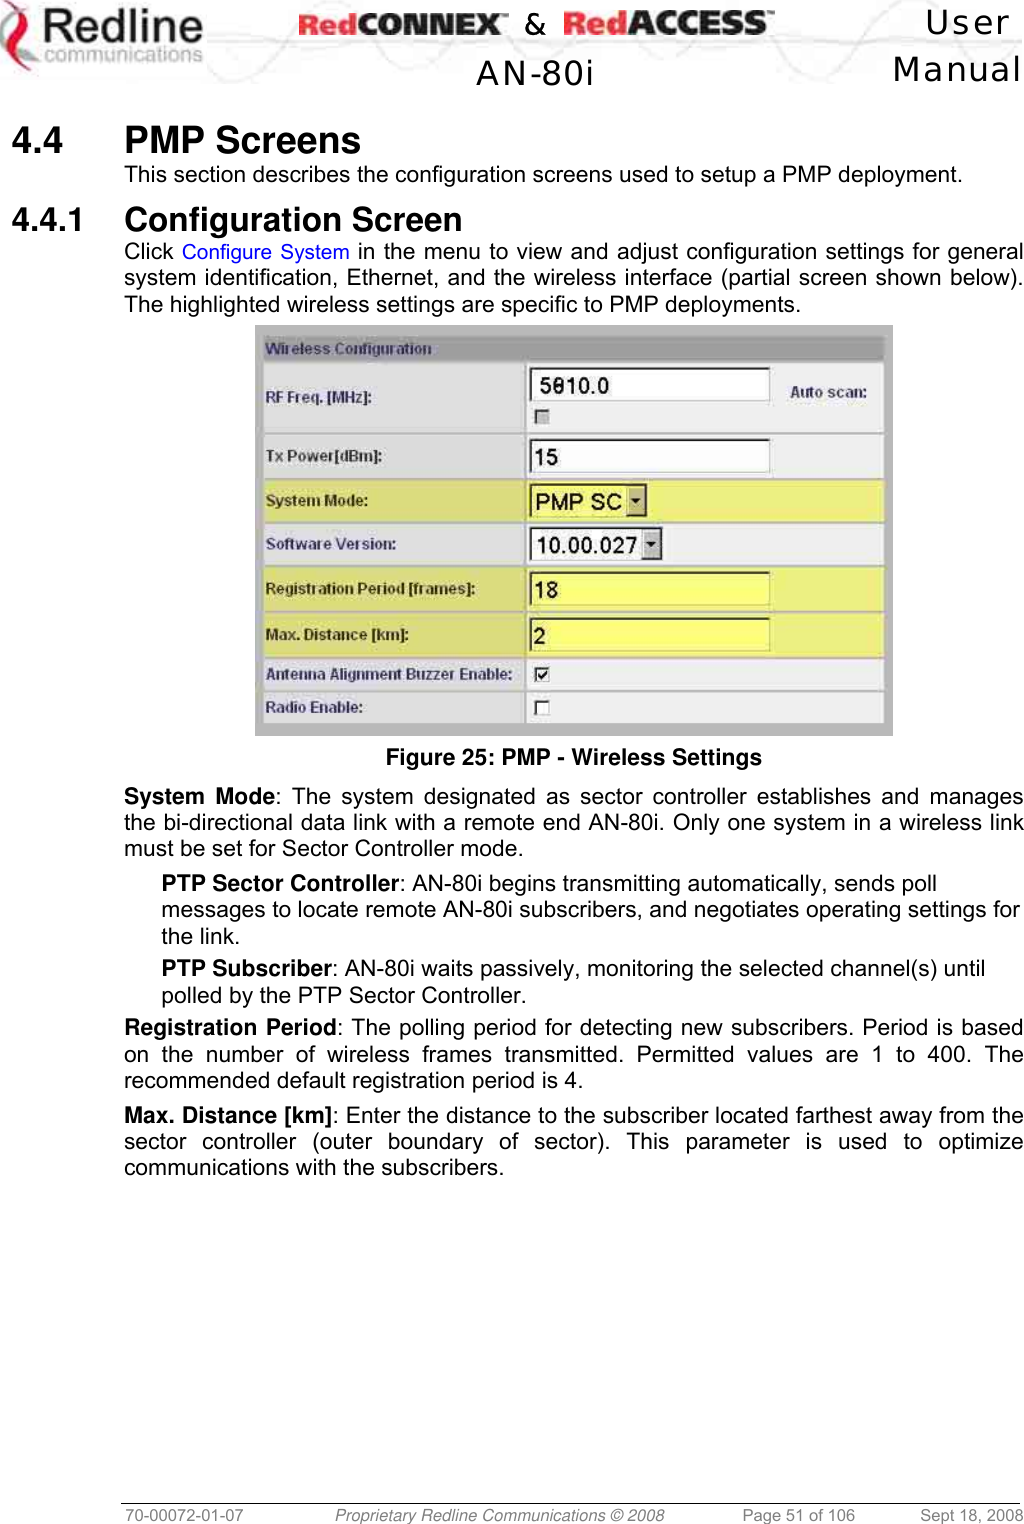    &amp;  User  AN-80i Manual  70-00072-01-07  Proprietary Redline Communications © 2008  Page 51 of 106  Sept 18, 2008  4.4 PMP Screens This section describes the configuration screens used to setup a PMP deployment. 4.4.1 Configuration Screen Click Configure System in the menu to view and adjust configuration settings for general system identification, Ethernet, and the wireless interface (partial screen shown below). The highlighted wireless settings are specific to PMP deployments.  Figure 25: PMP - Wireless Settings System Mode: The system designated as sector controller establishes and manages the bi-directional data link with a remote end AN-80i. Only one system in a wireless link must be set for Sector Controller mode. PTP Sector Controller: AN-80i begins transmitting automatically, sends poll messages to locate remote AN-80i subscribers, and negotiates operating settings for the link. PTP Subscriber: AN-80i waits passively, monitoring the selected channel(s) until polled by the PTP Sector Controller. Registration Period: The polling period for detecting new subscribers. Period is based on the number of wireless frames transmitted. Permitted values are 1 to 400. The recommended default registration period is 4. Max. Distance [km]: Enter the distance to the subscriber located farthest away from the sector controller (outer boundary of sector). This parameter is used to optimize communications with the subscribers. 